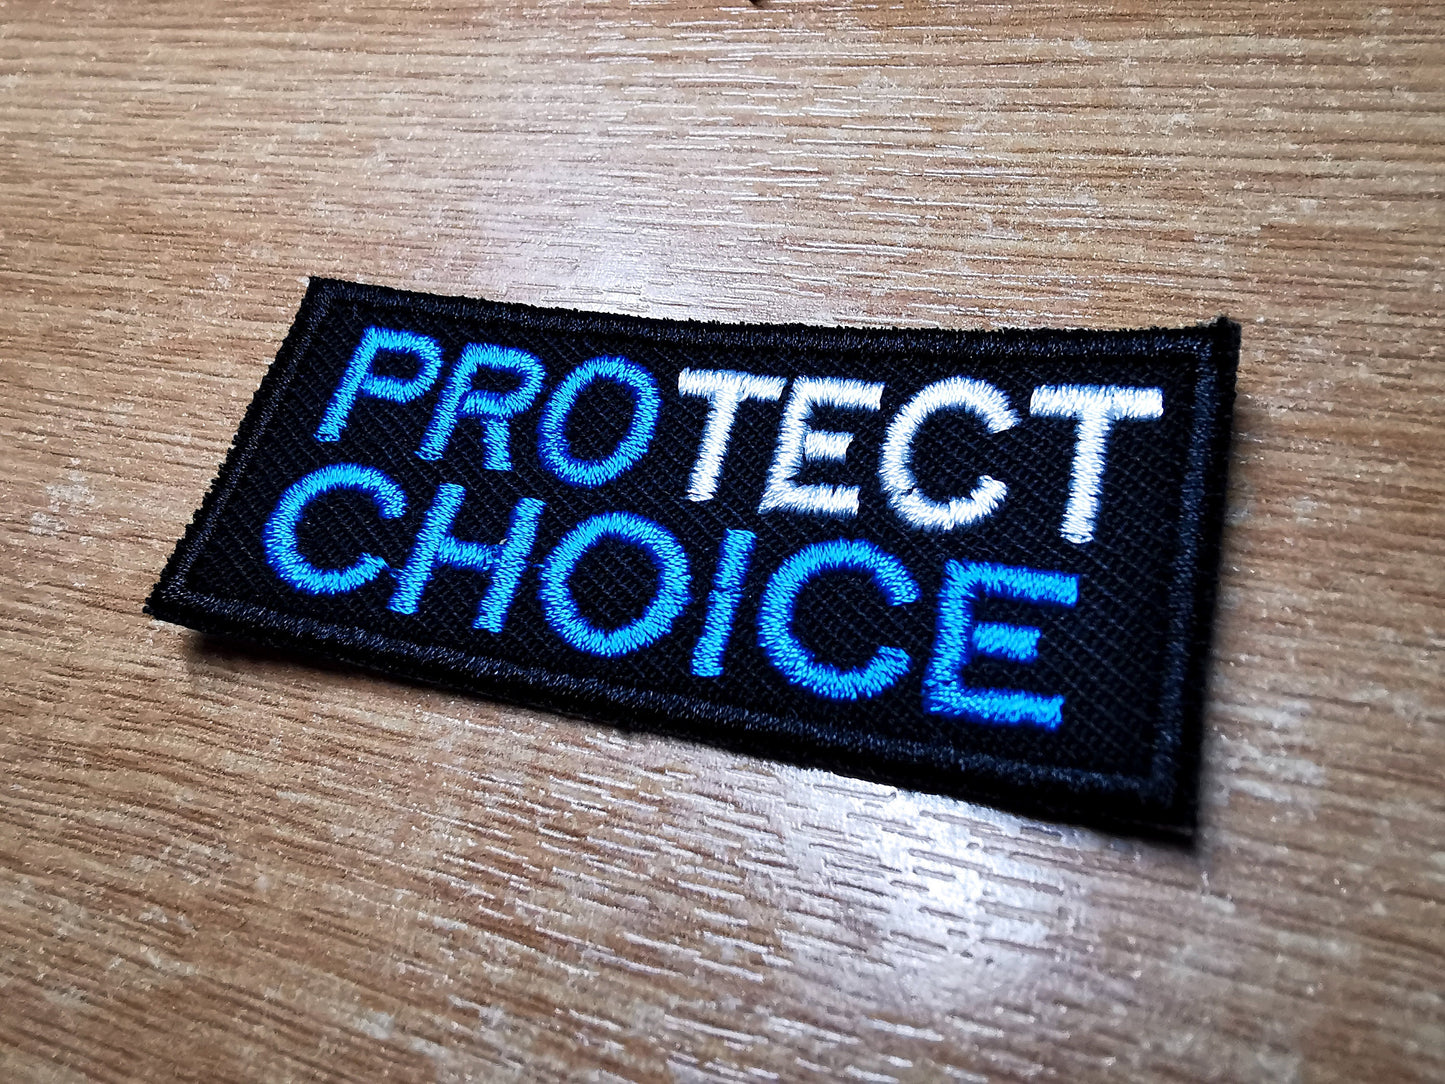 Protect Choice Pro Choice Extra Vibrant Aqua Blue Feminist Embroidered Iron On Patch Collection Abortion Politics Punk